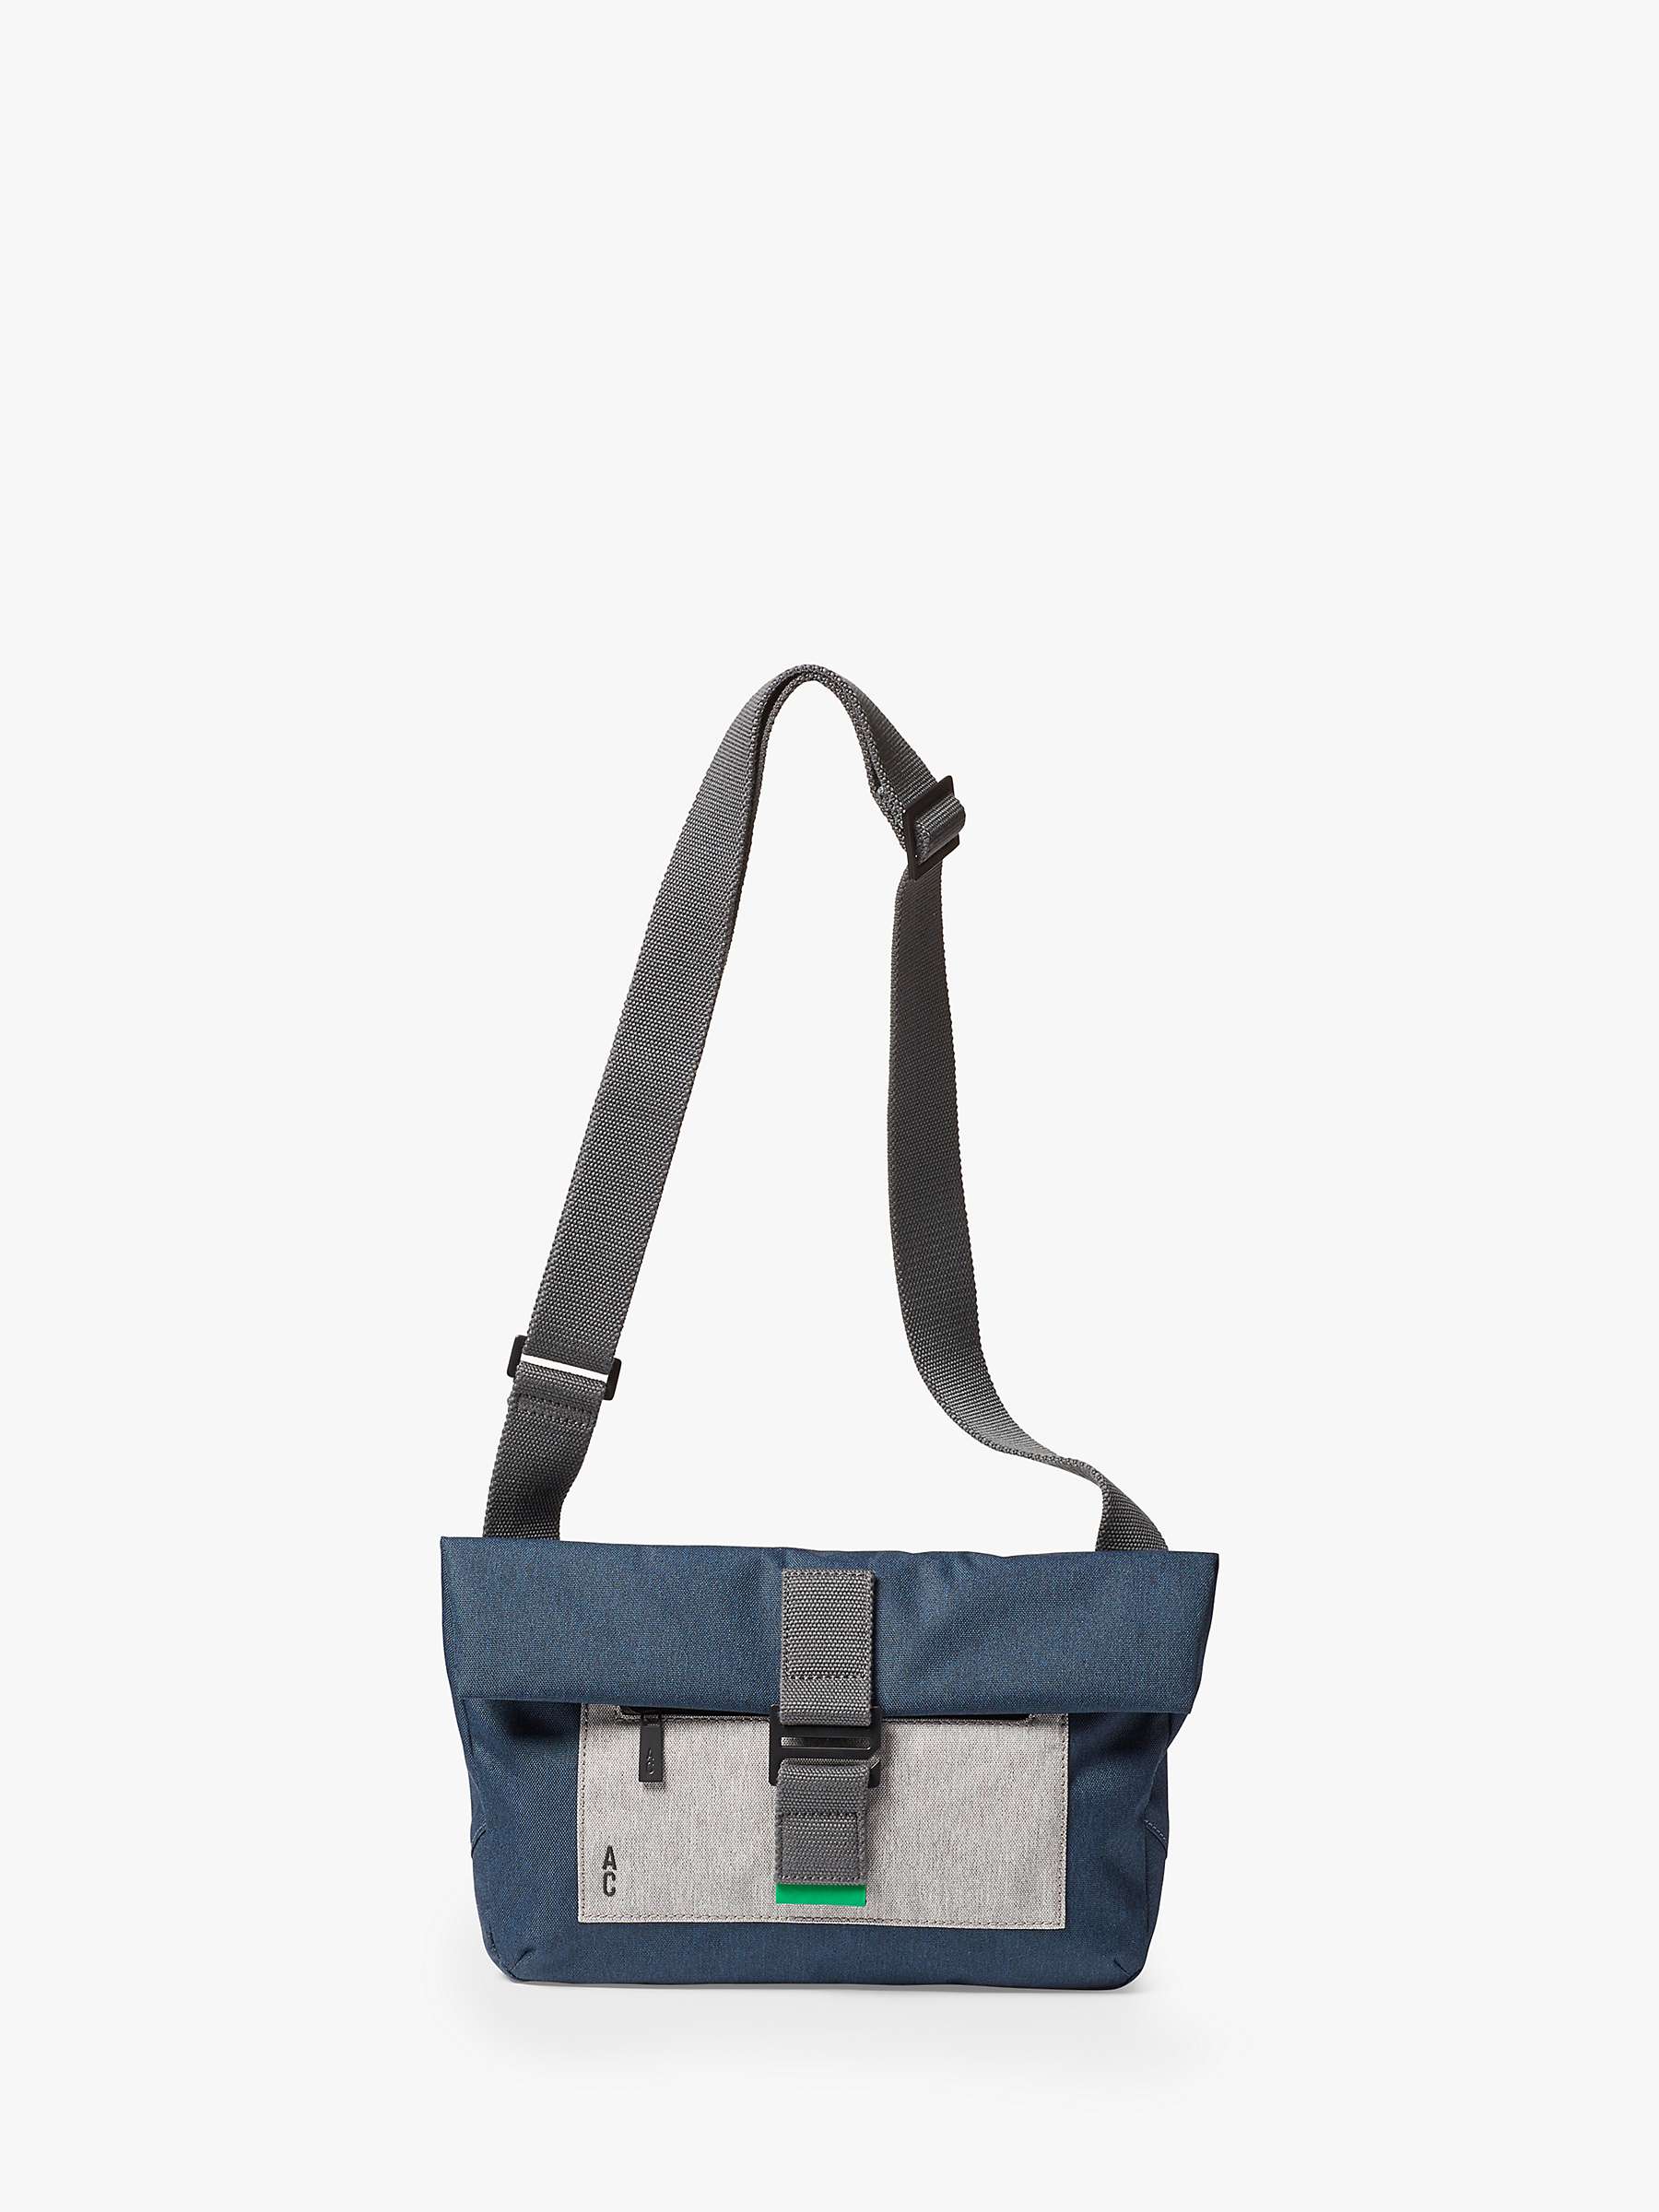 Buy Ally Capellino Travis Travel Cycle Satchel Bag Online at johnlewis.com